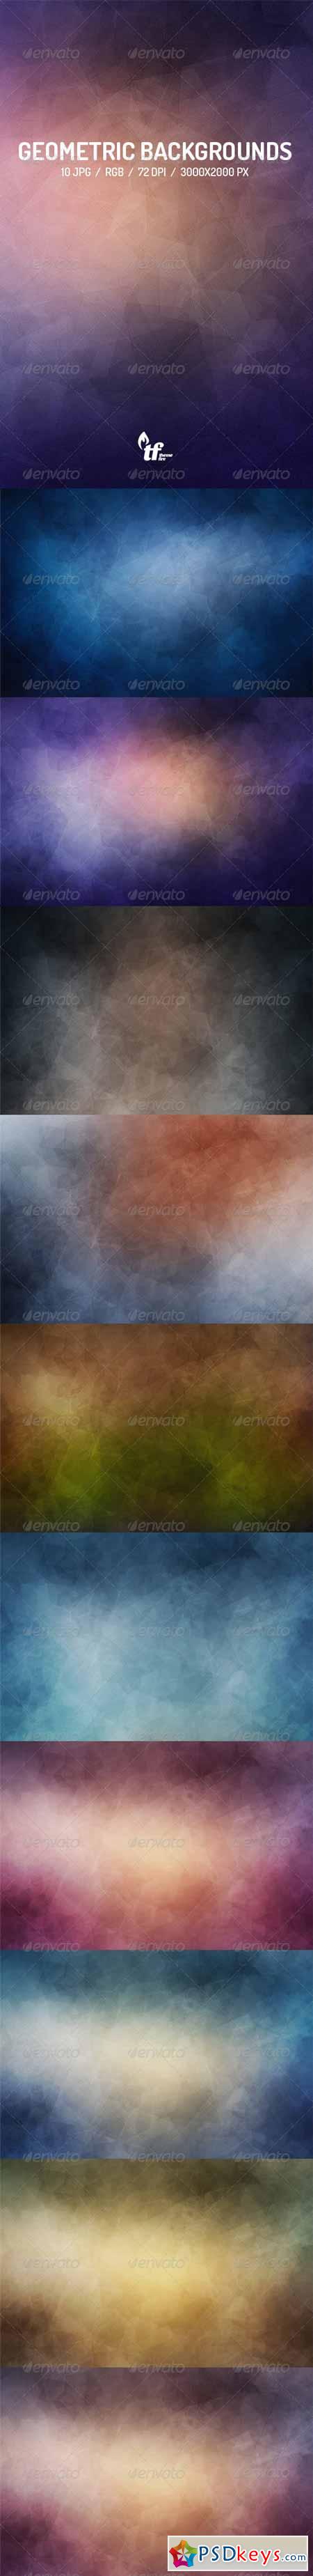 Geometric Abstract Backgrounds 7691962